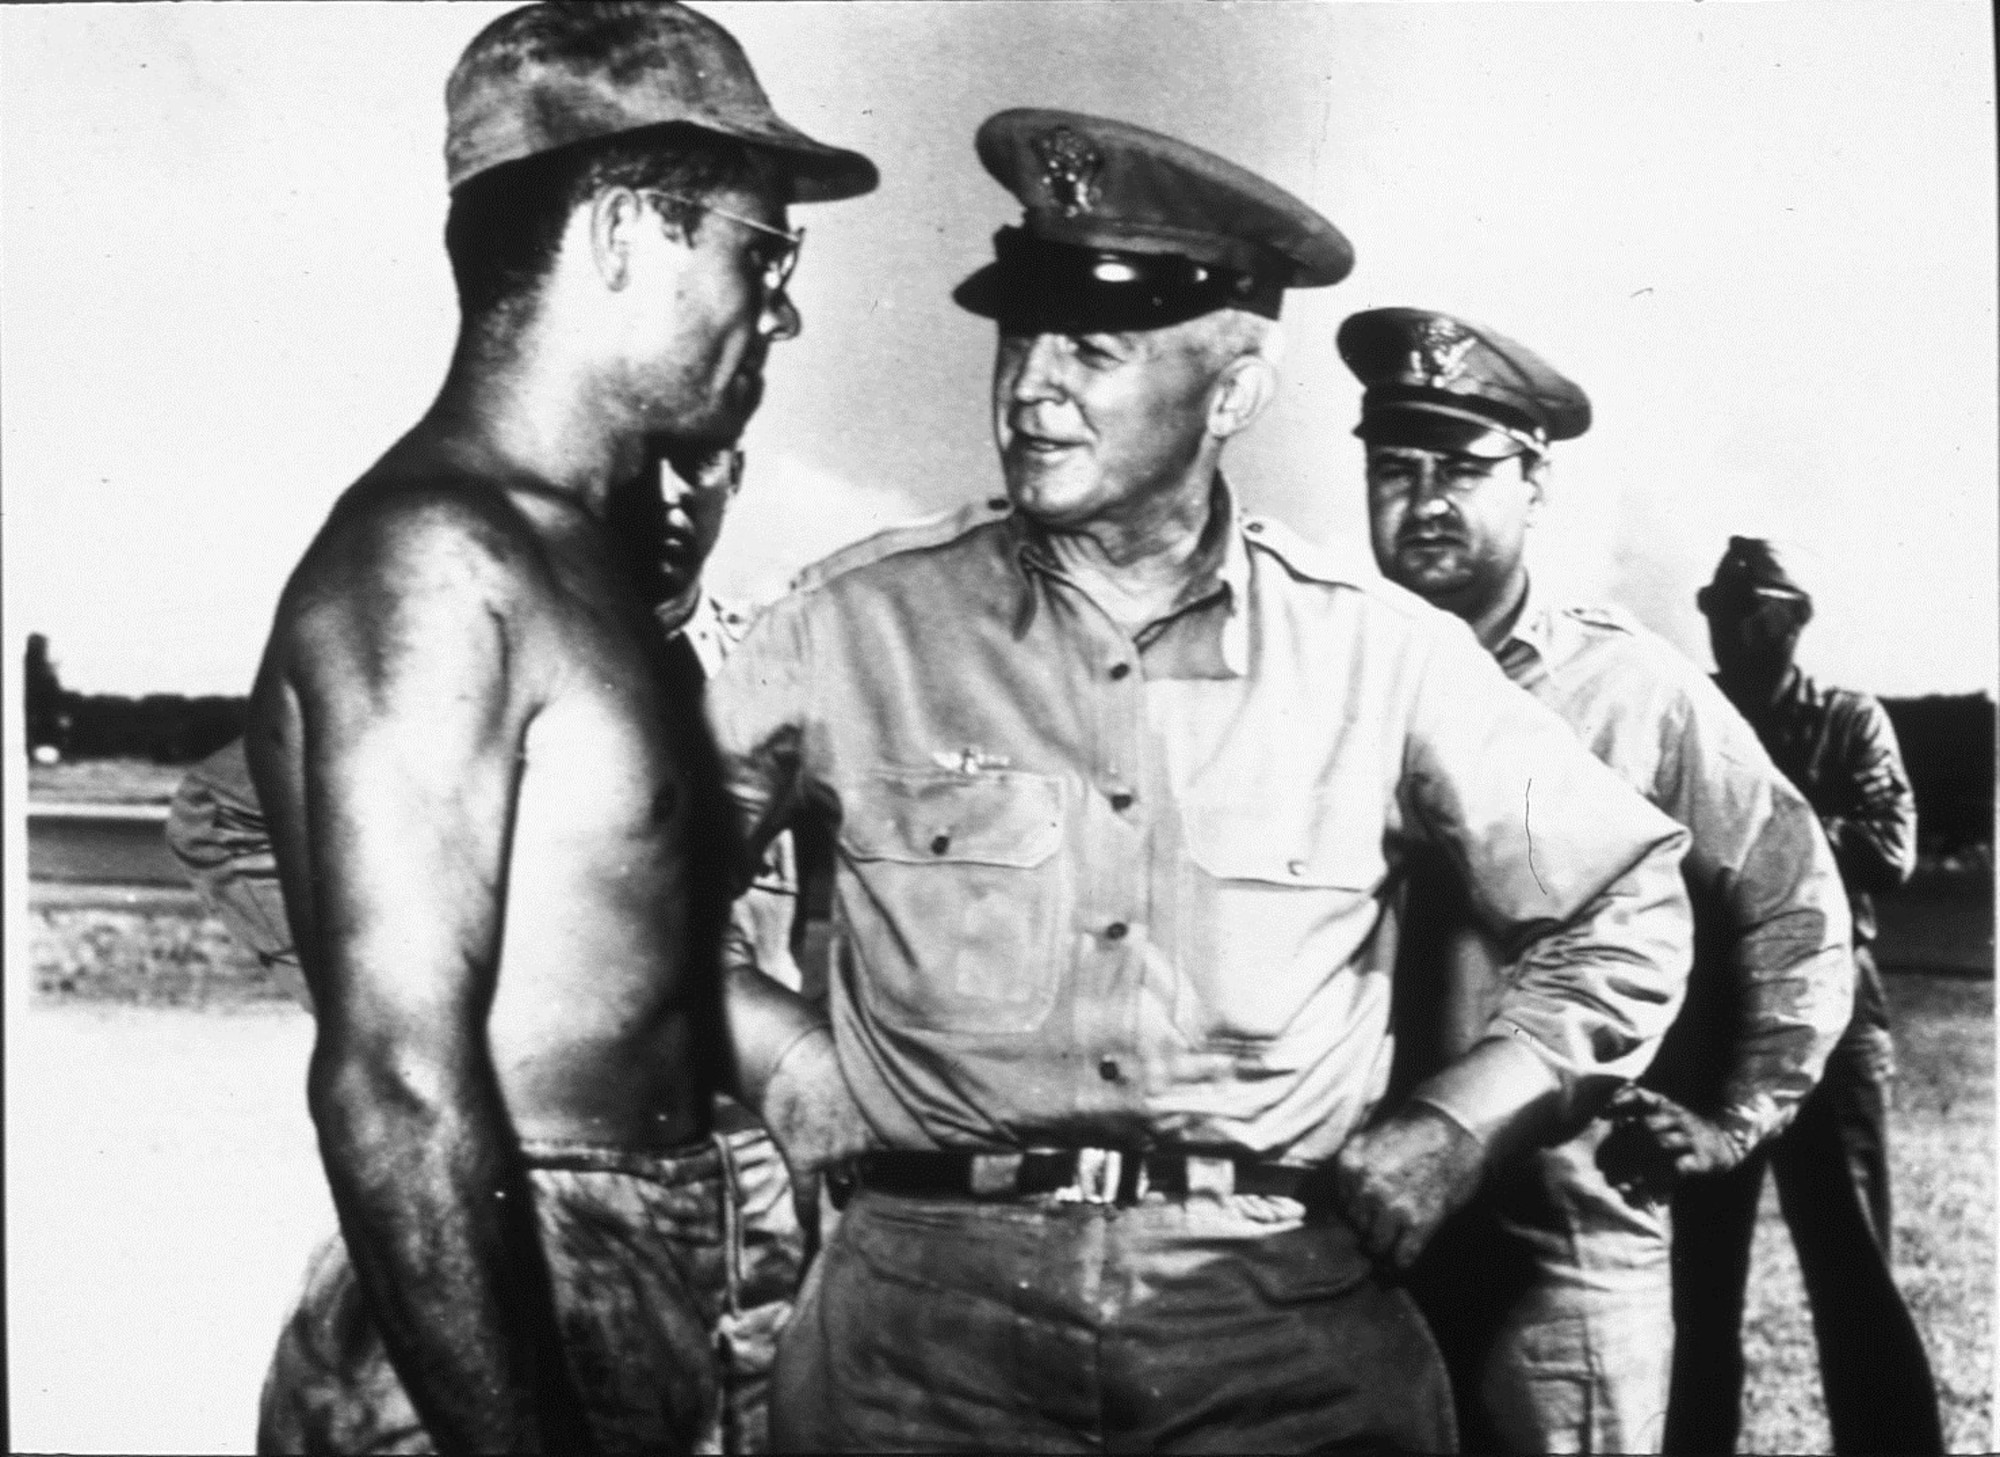 Gen. Henry H. “Hap” Arnold receives a report from B-29 maintainer SSgt Leo F. Fliess sometime in 1945. Maj. Gen. Curtis E. LeMay stands in the background. (Courtesy photo)